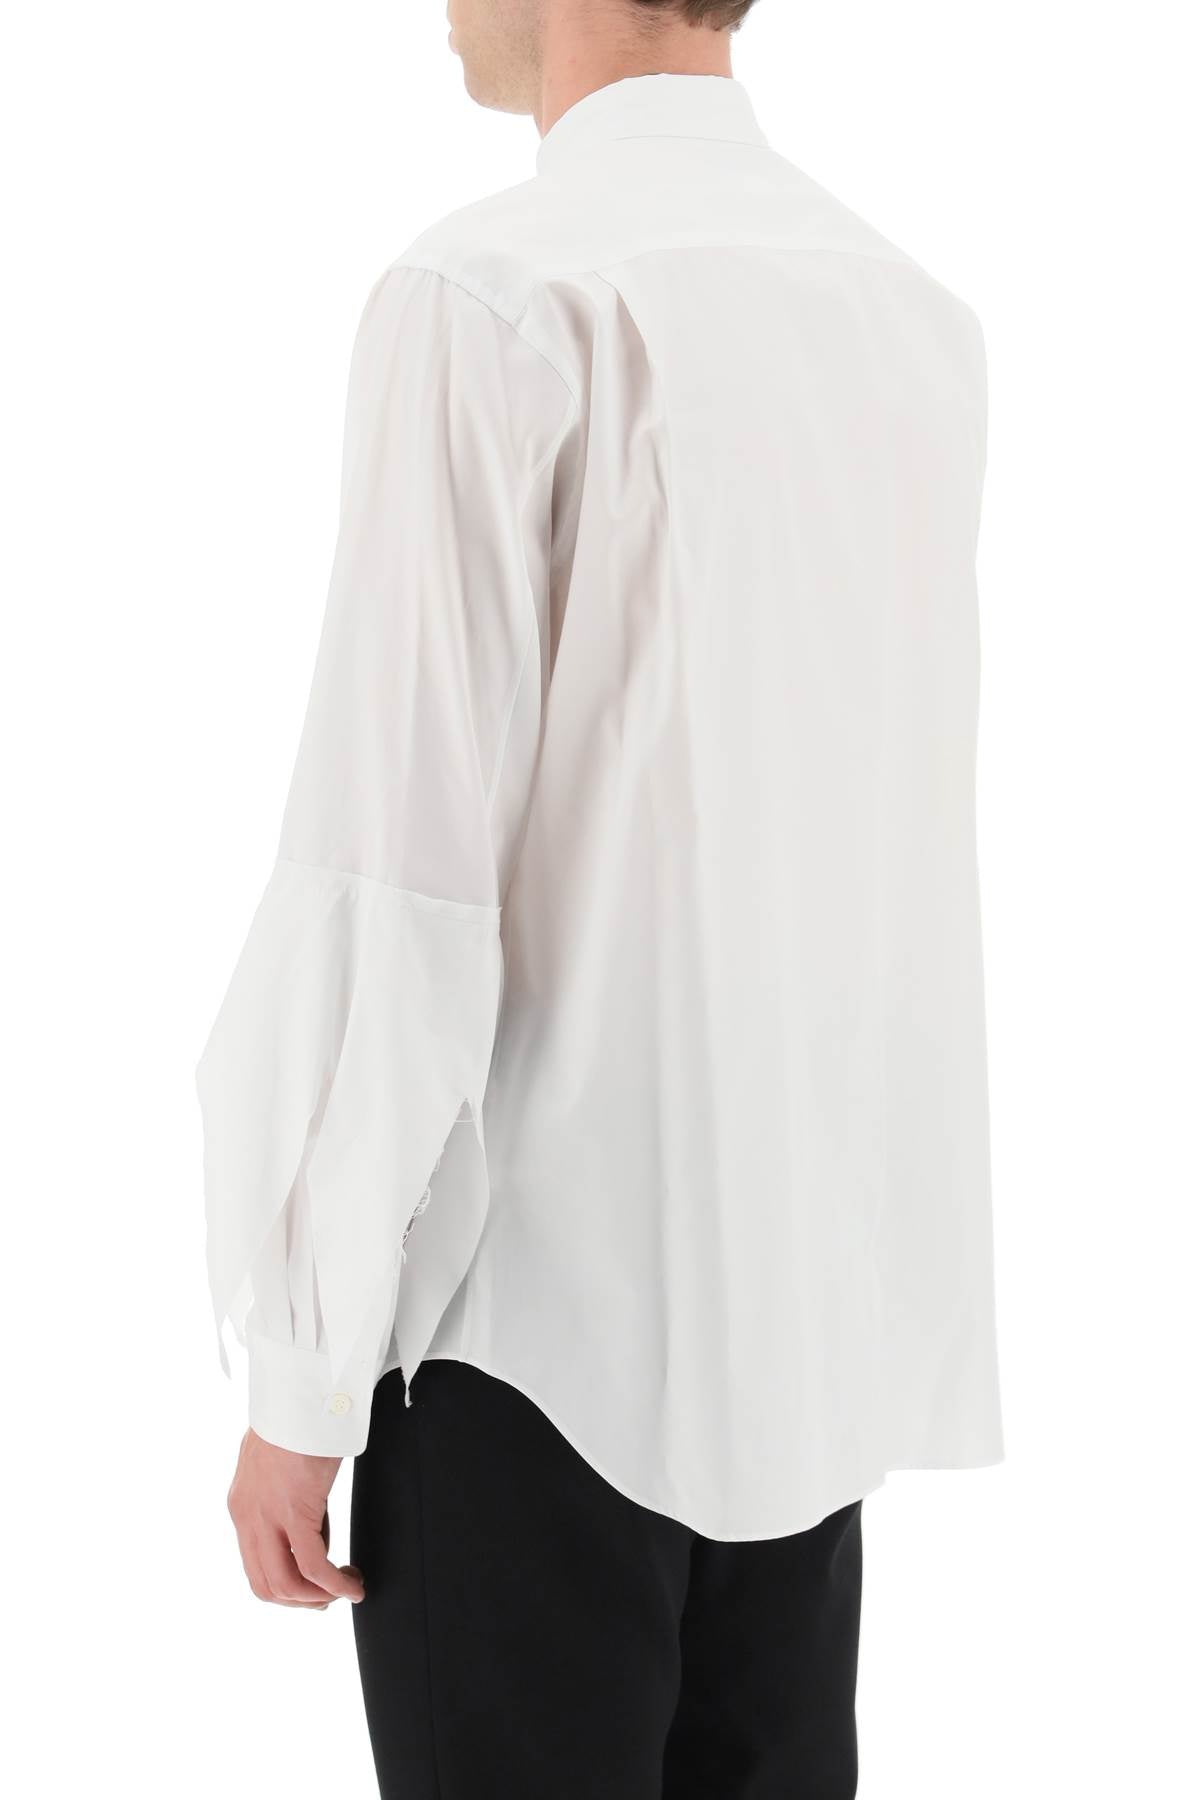 Comme des garcons homme plus spiked frayed-sleeved shirt-2